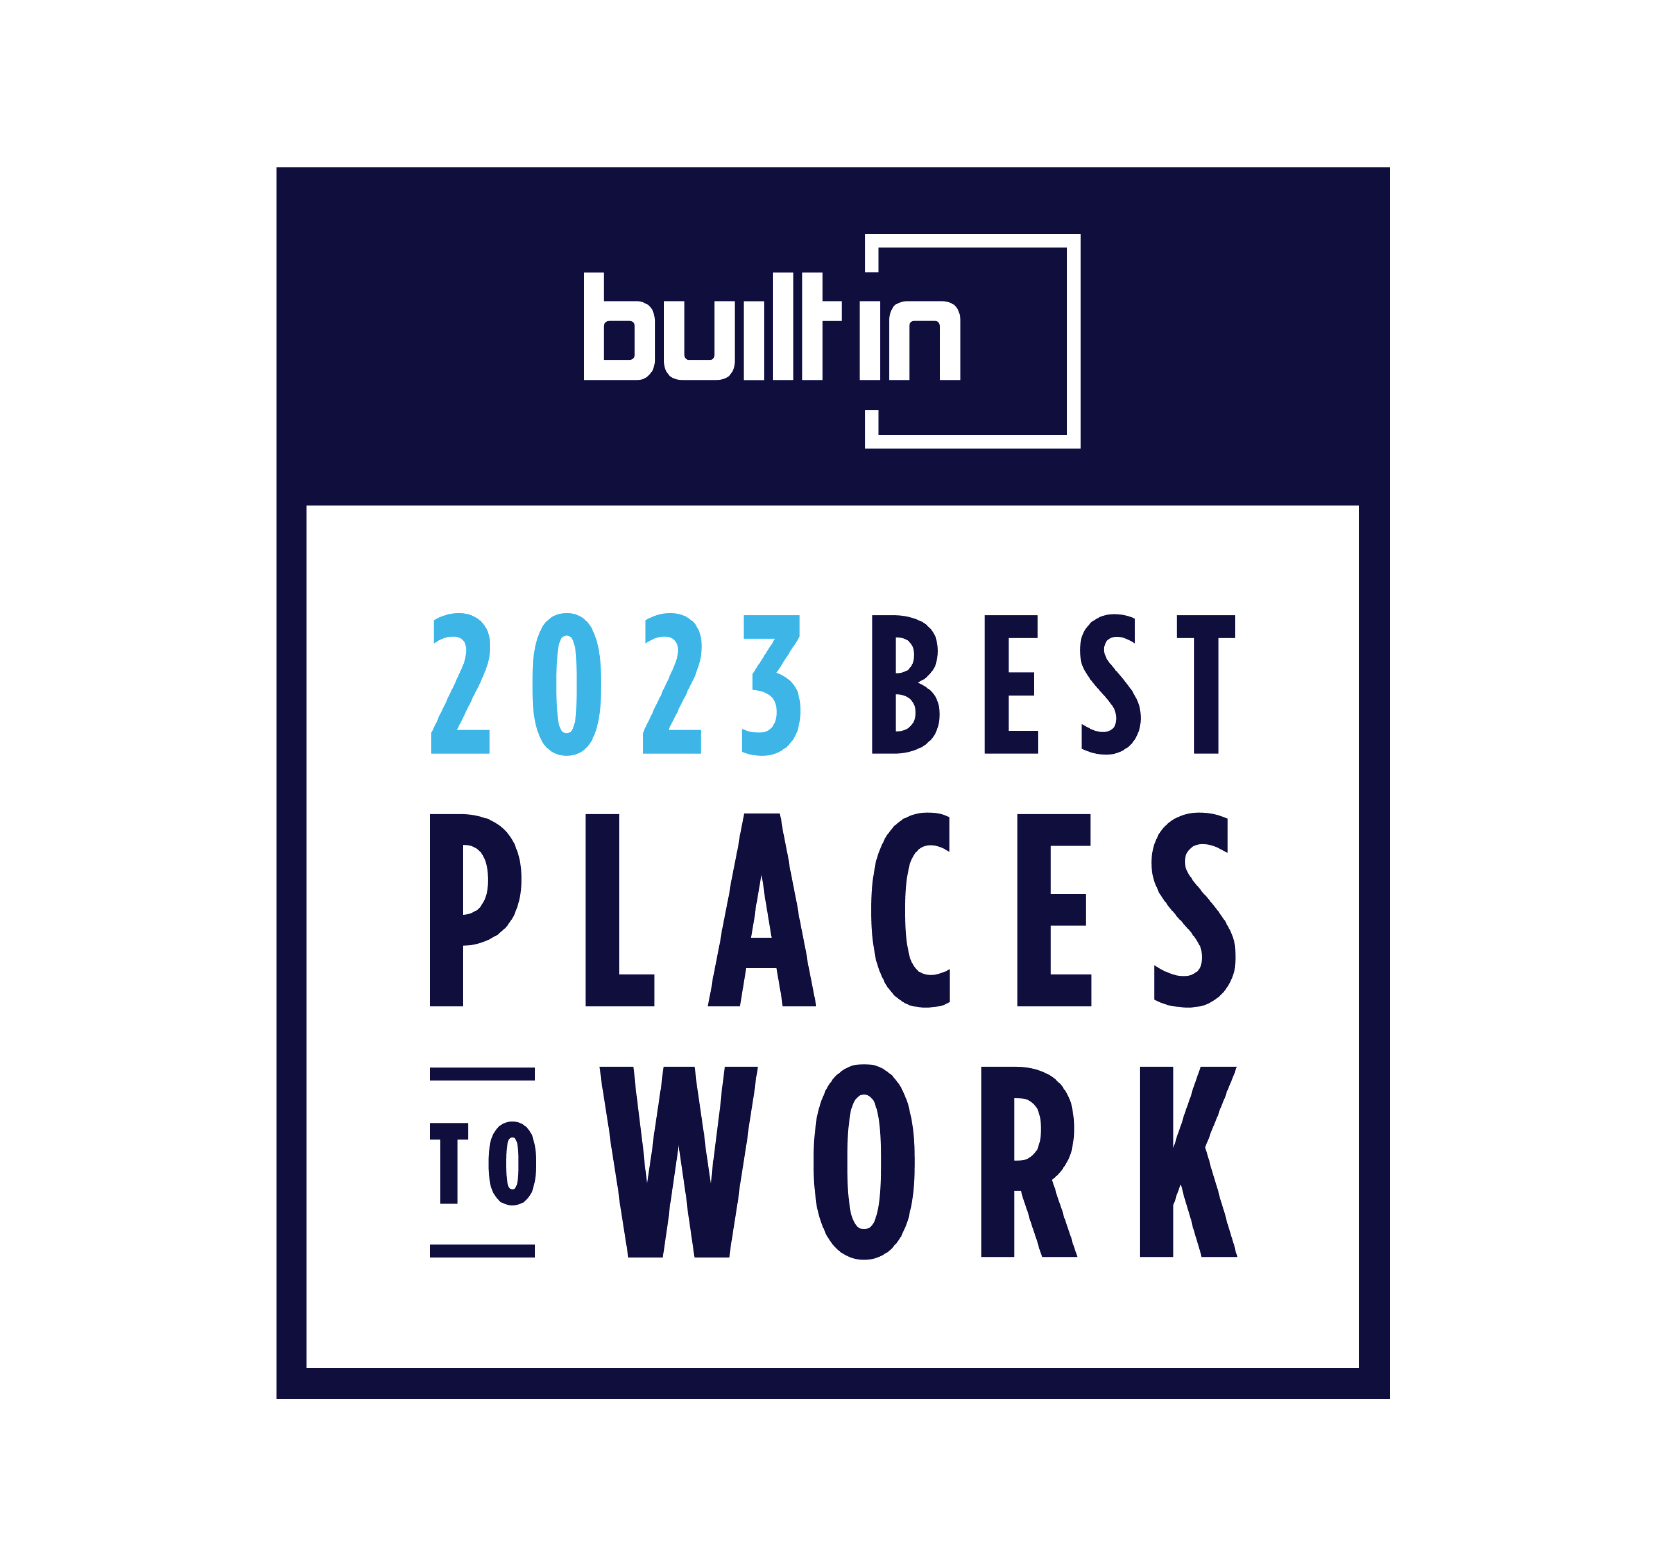 Built in 2023 Best Places to Work award logo